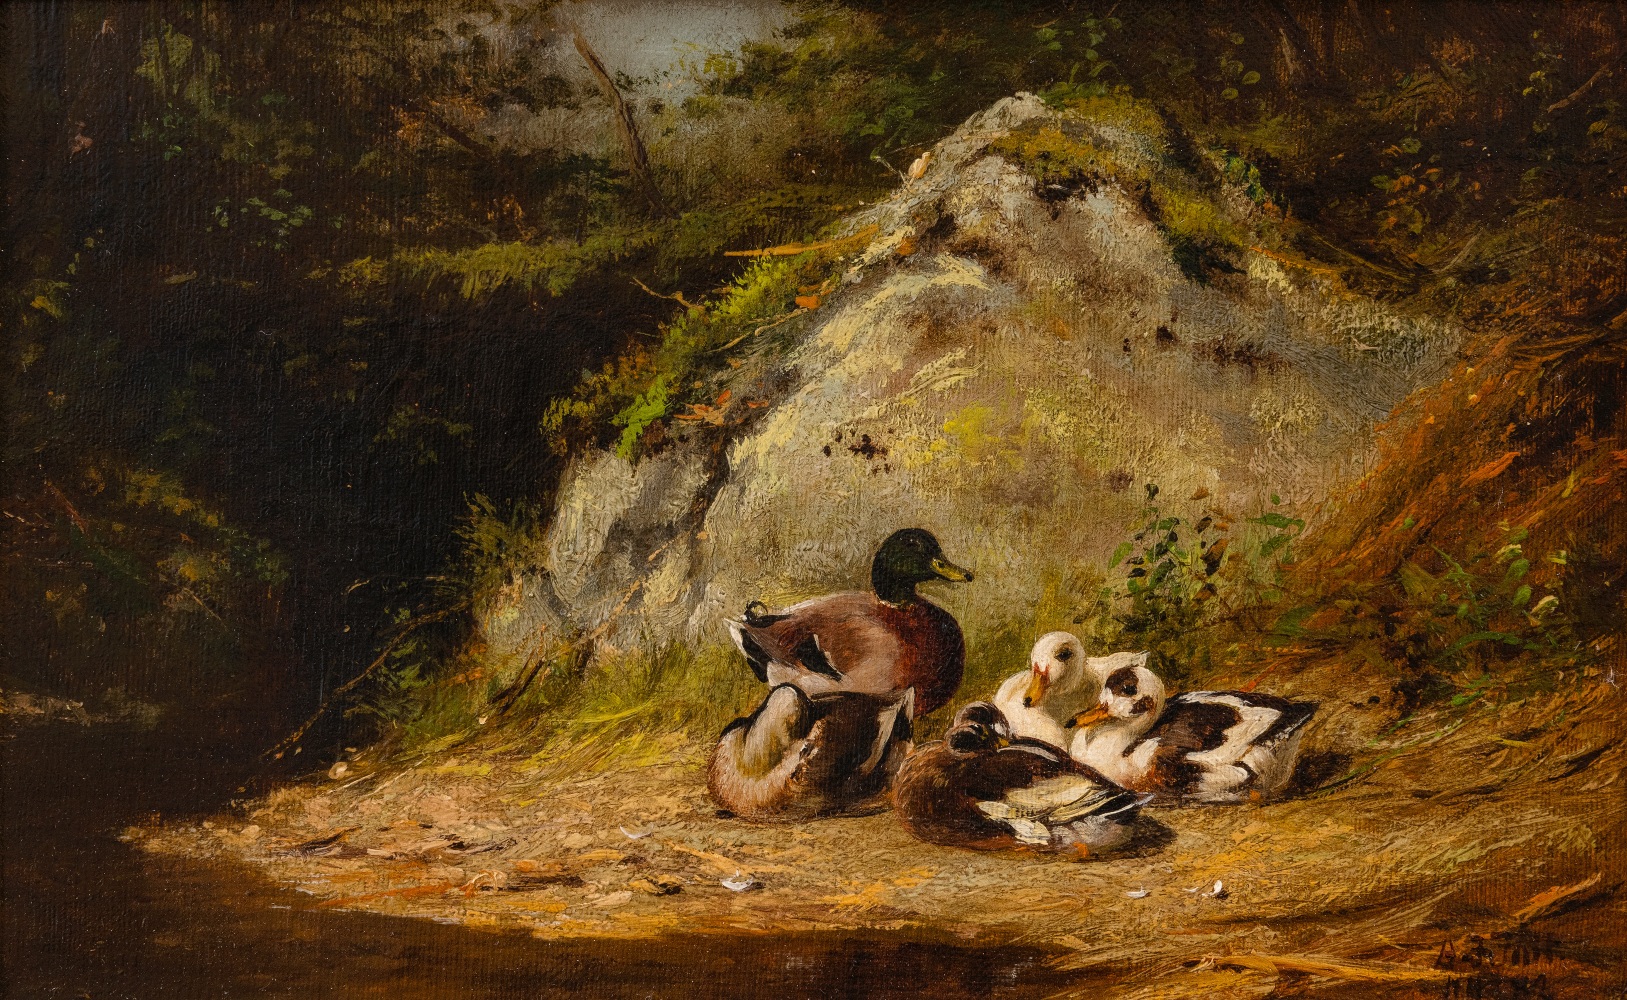 Arthur Fitzwilliam Tait (1819–1905), Ducks Sunning, 1882, oil on canvas, 10 x 14 in., signed and dated lower right